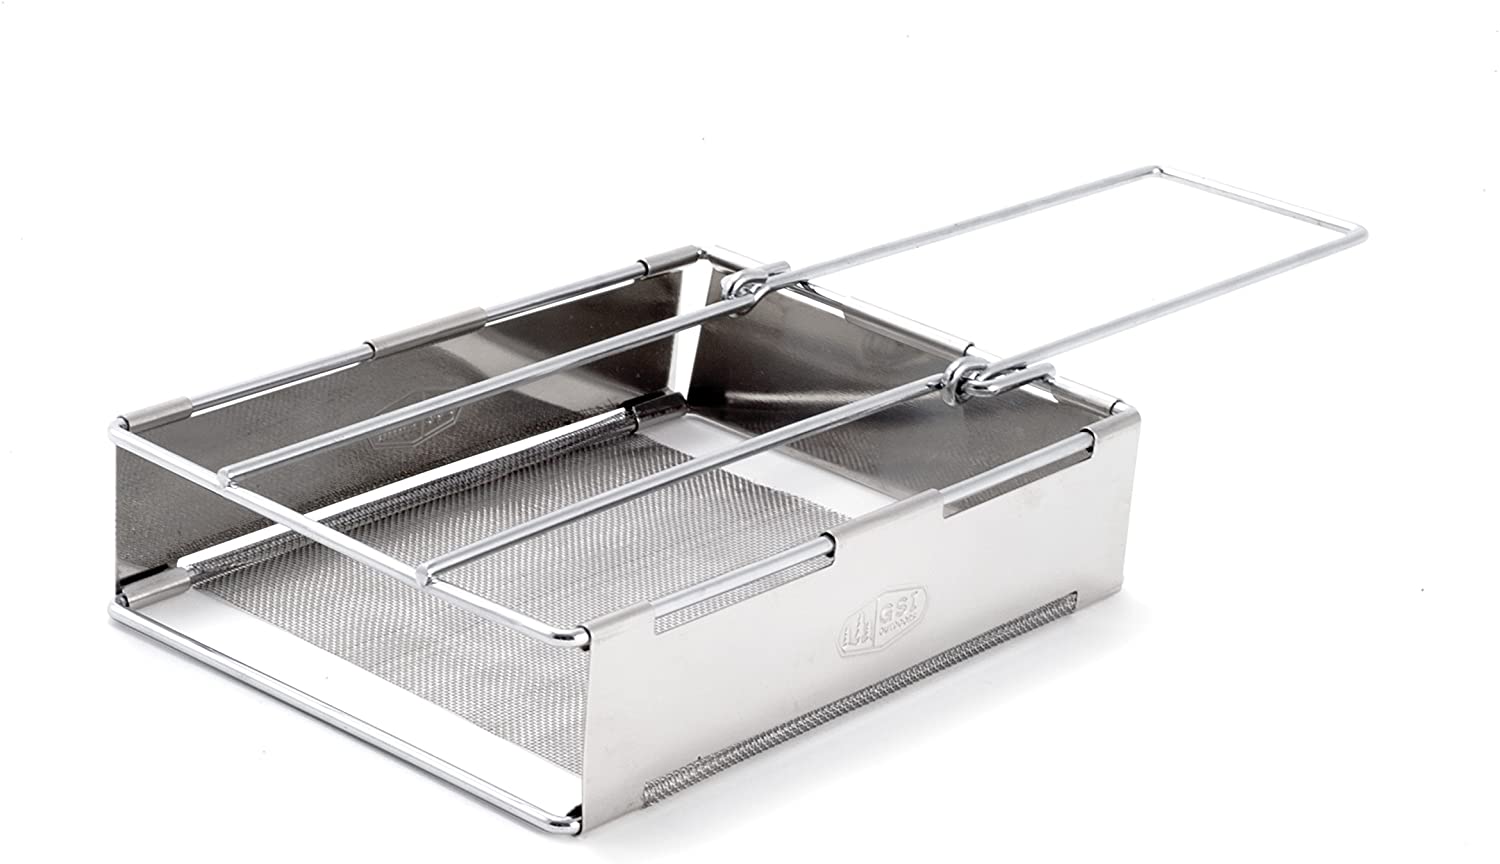 GSI Outdoors Glacier Stainless Steel Toaster That's Collapsible and Hand-Held for Camping